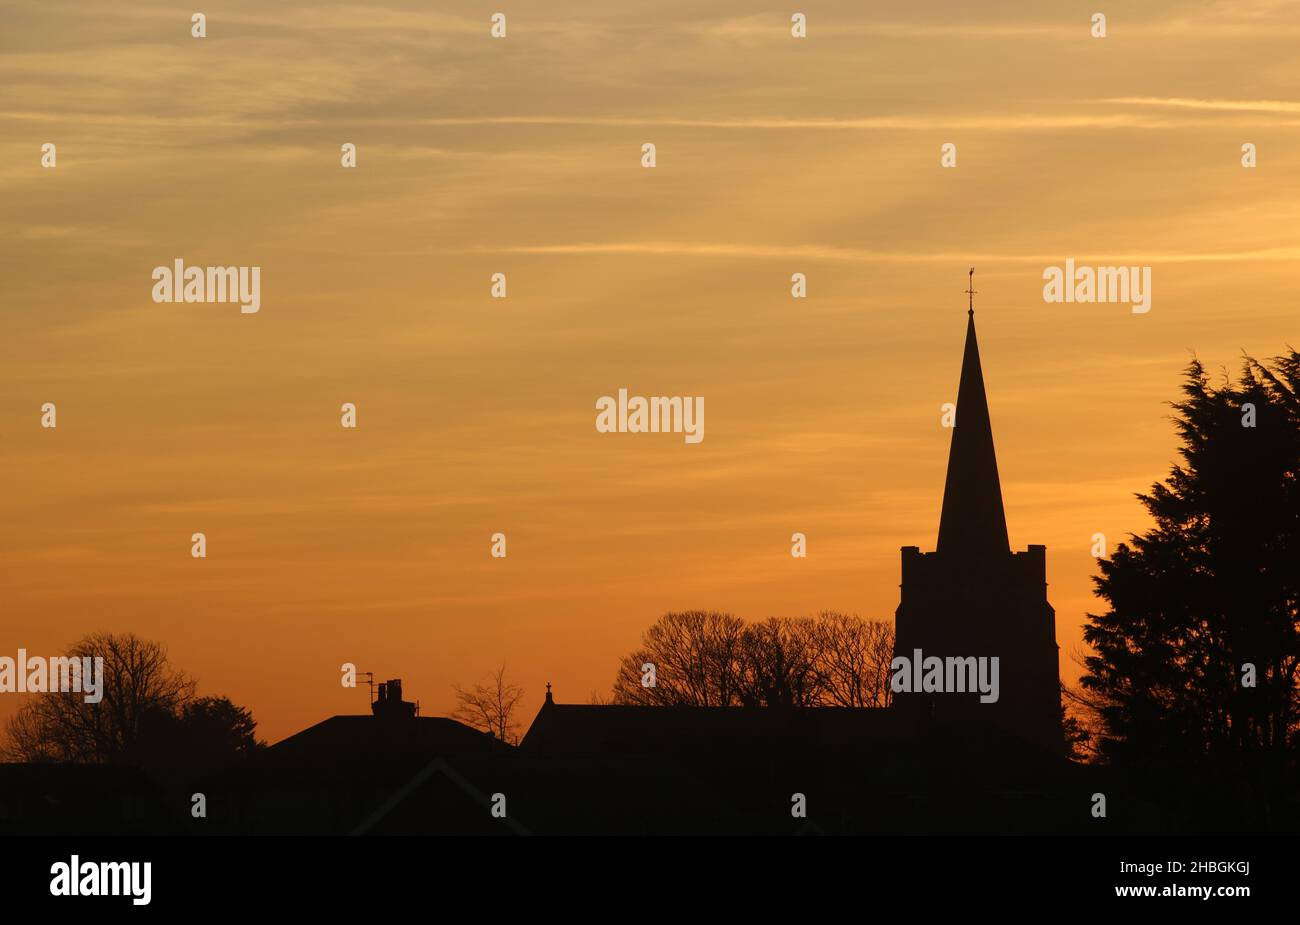 Silhouette of trees, roofs and tower and steeple of St John the Baptist Church in Pilling, Lancashire at sunset on a December evening. Stock Photo